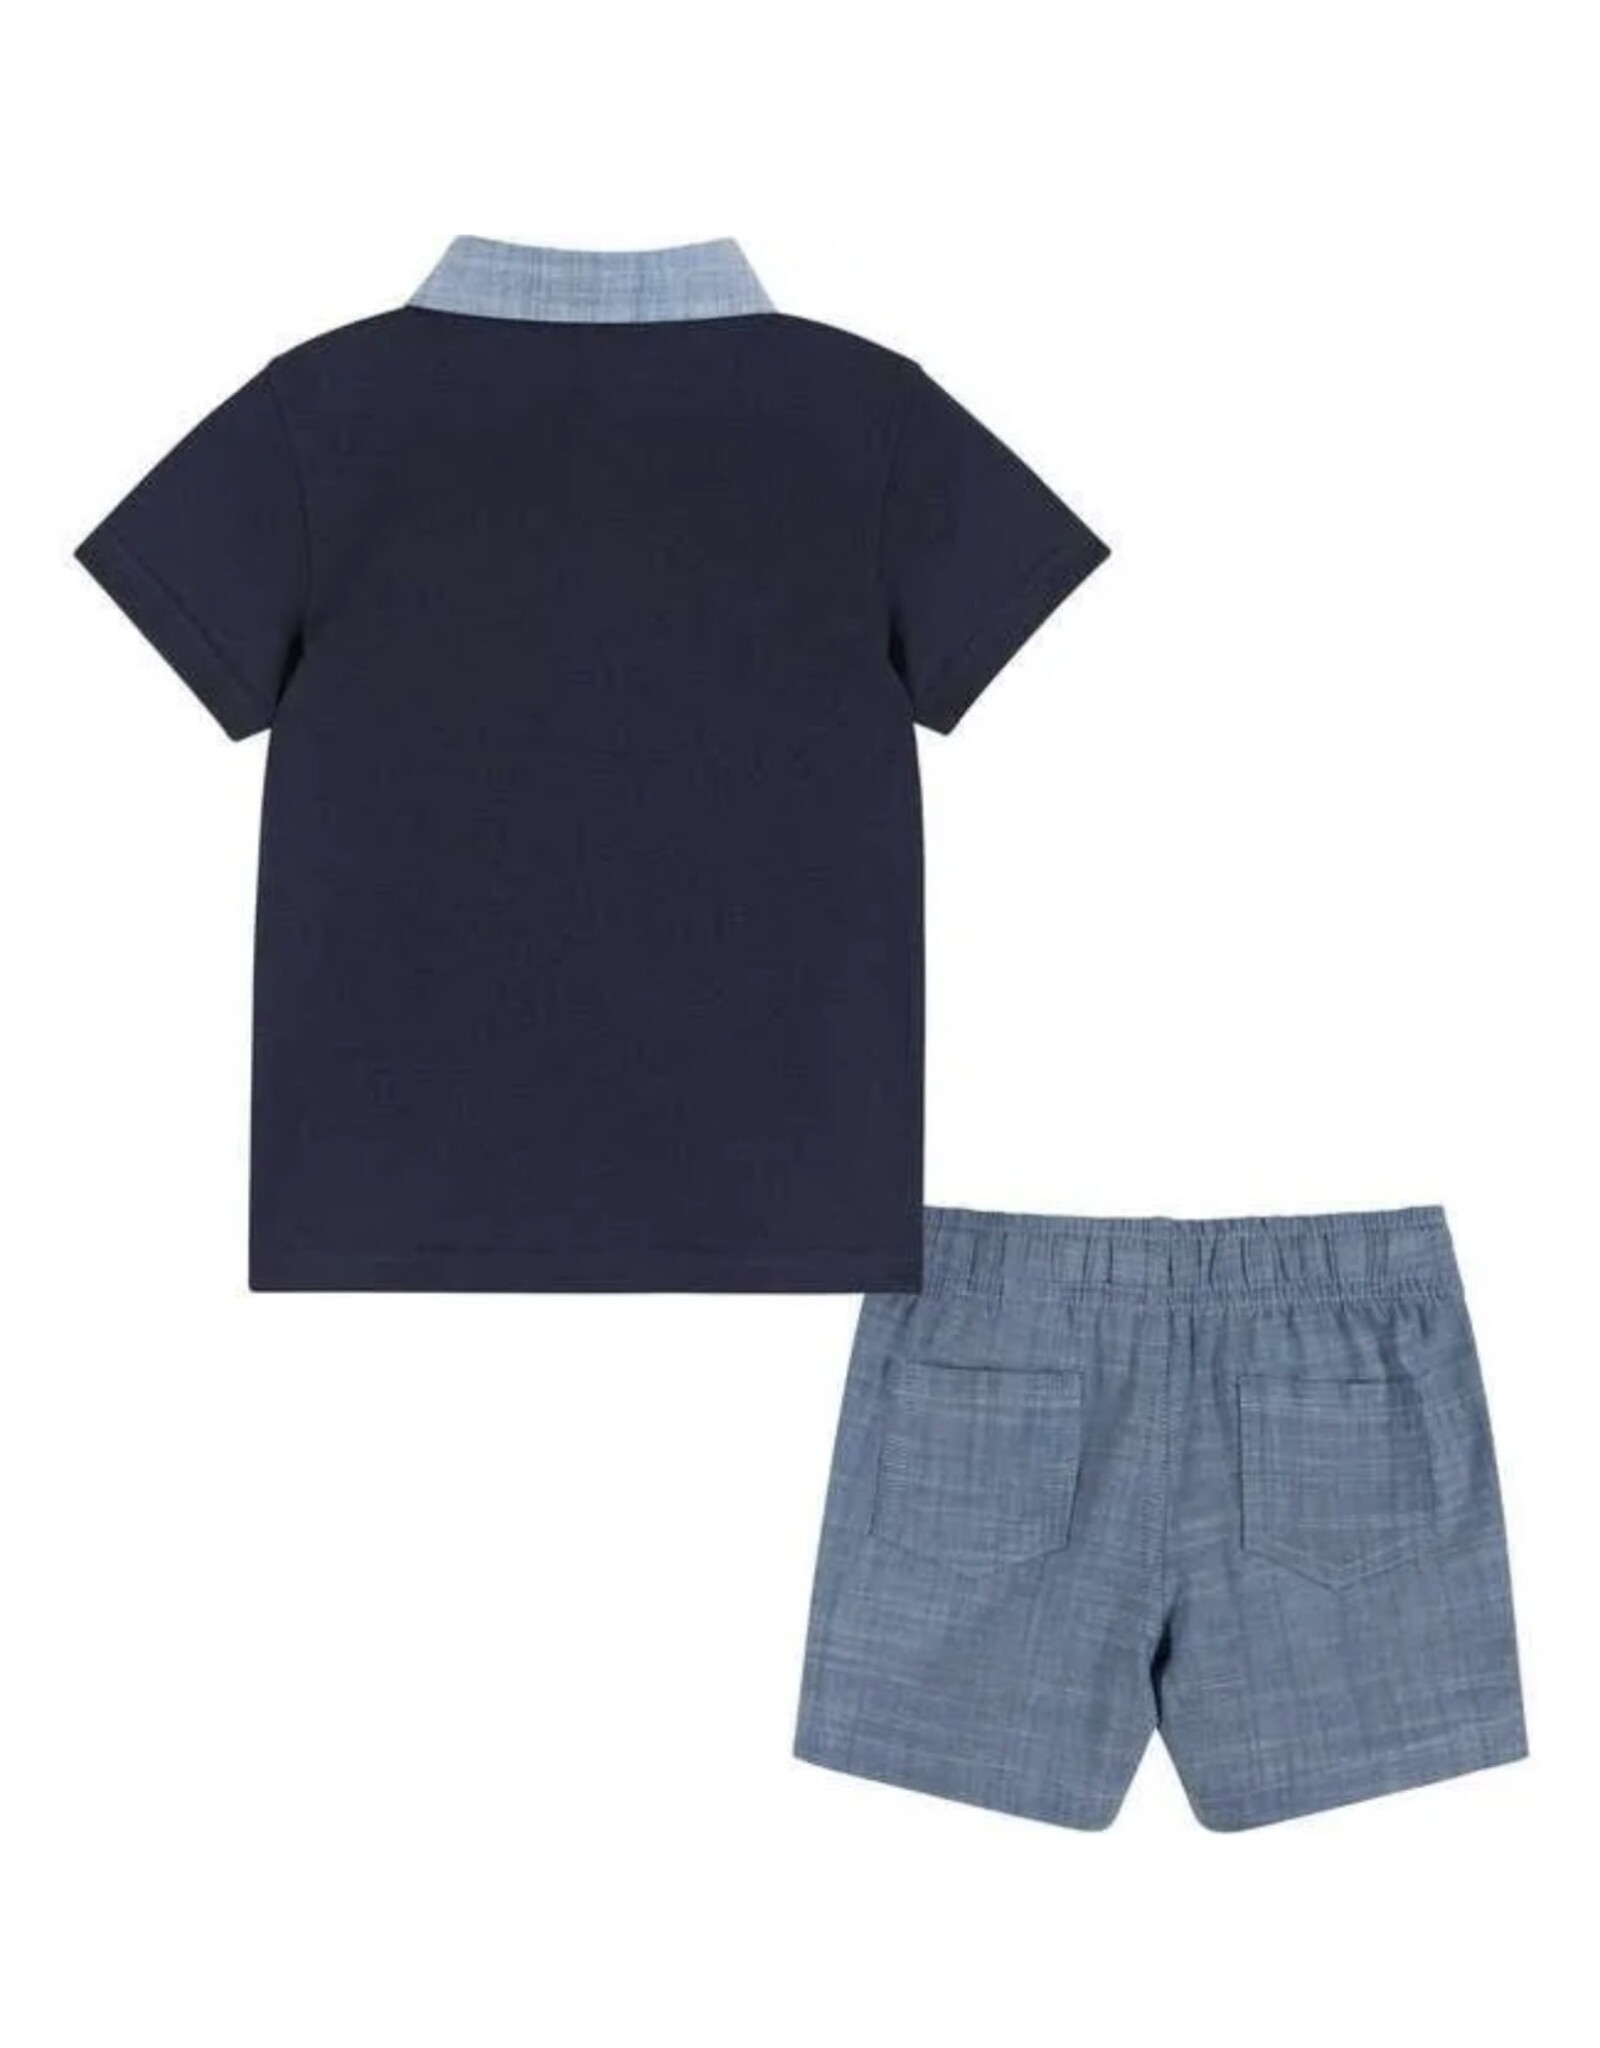 Andy & Evan Andy & Evan- Navy & Chambray Polo Infant Short Set